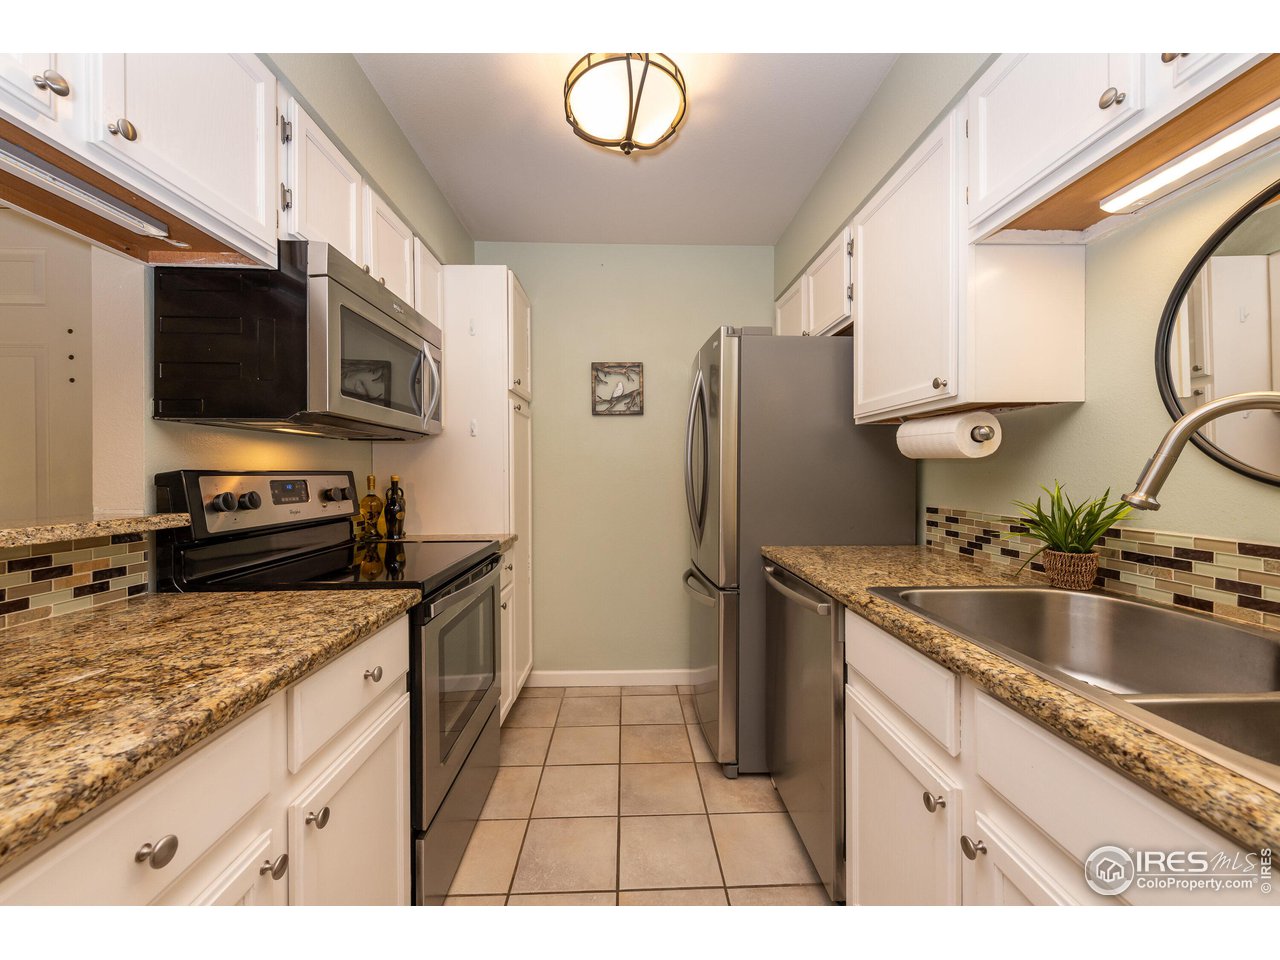 Nicely updated with stainless steel appliances